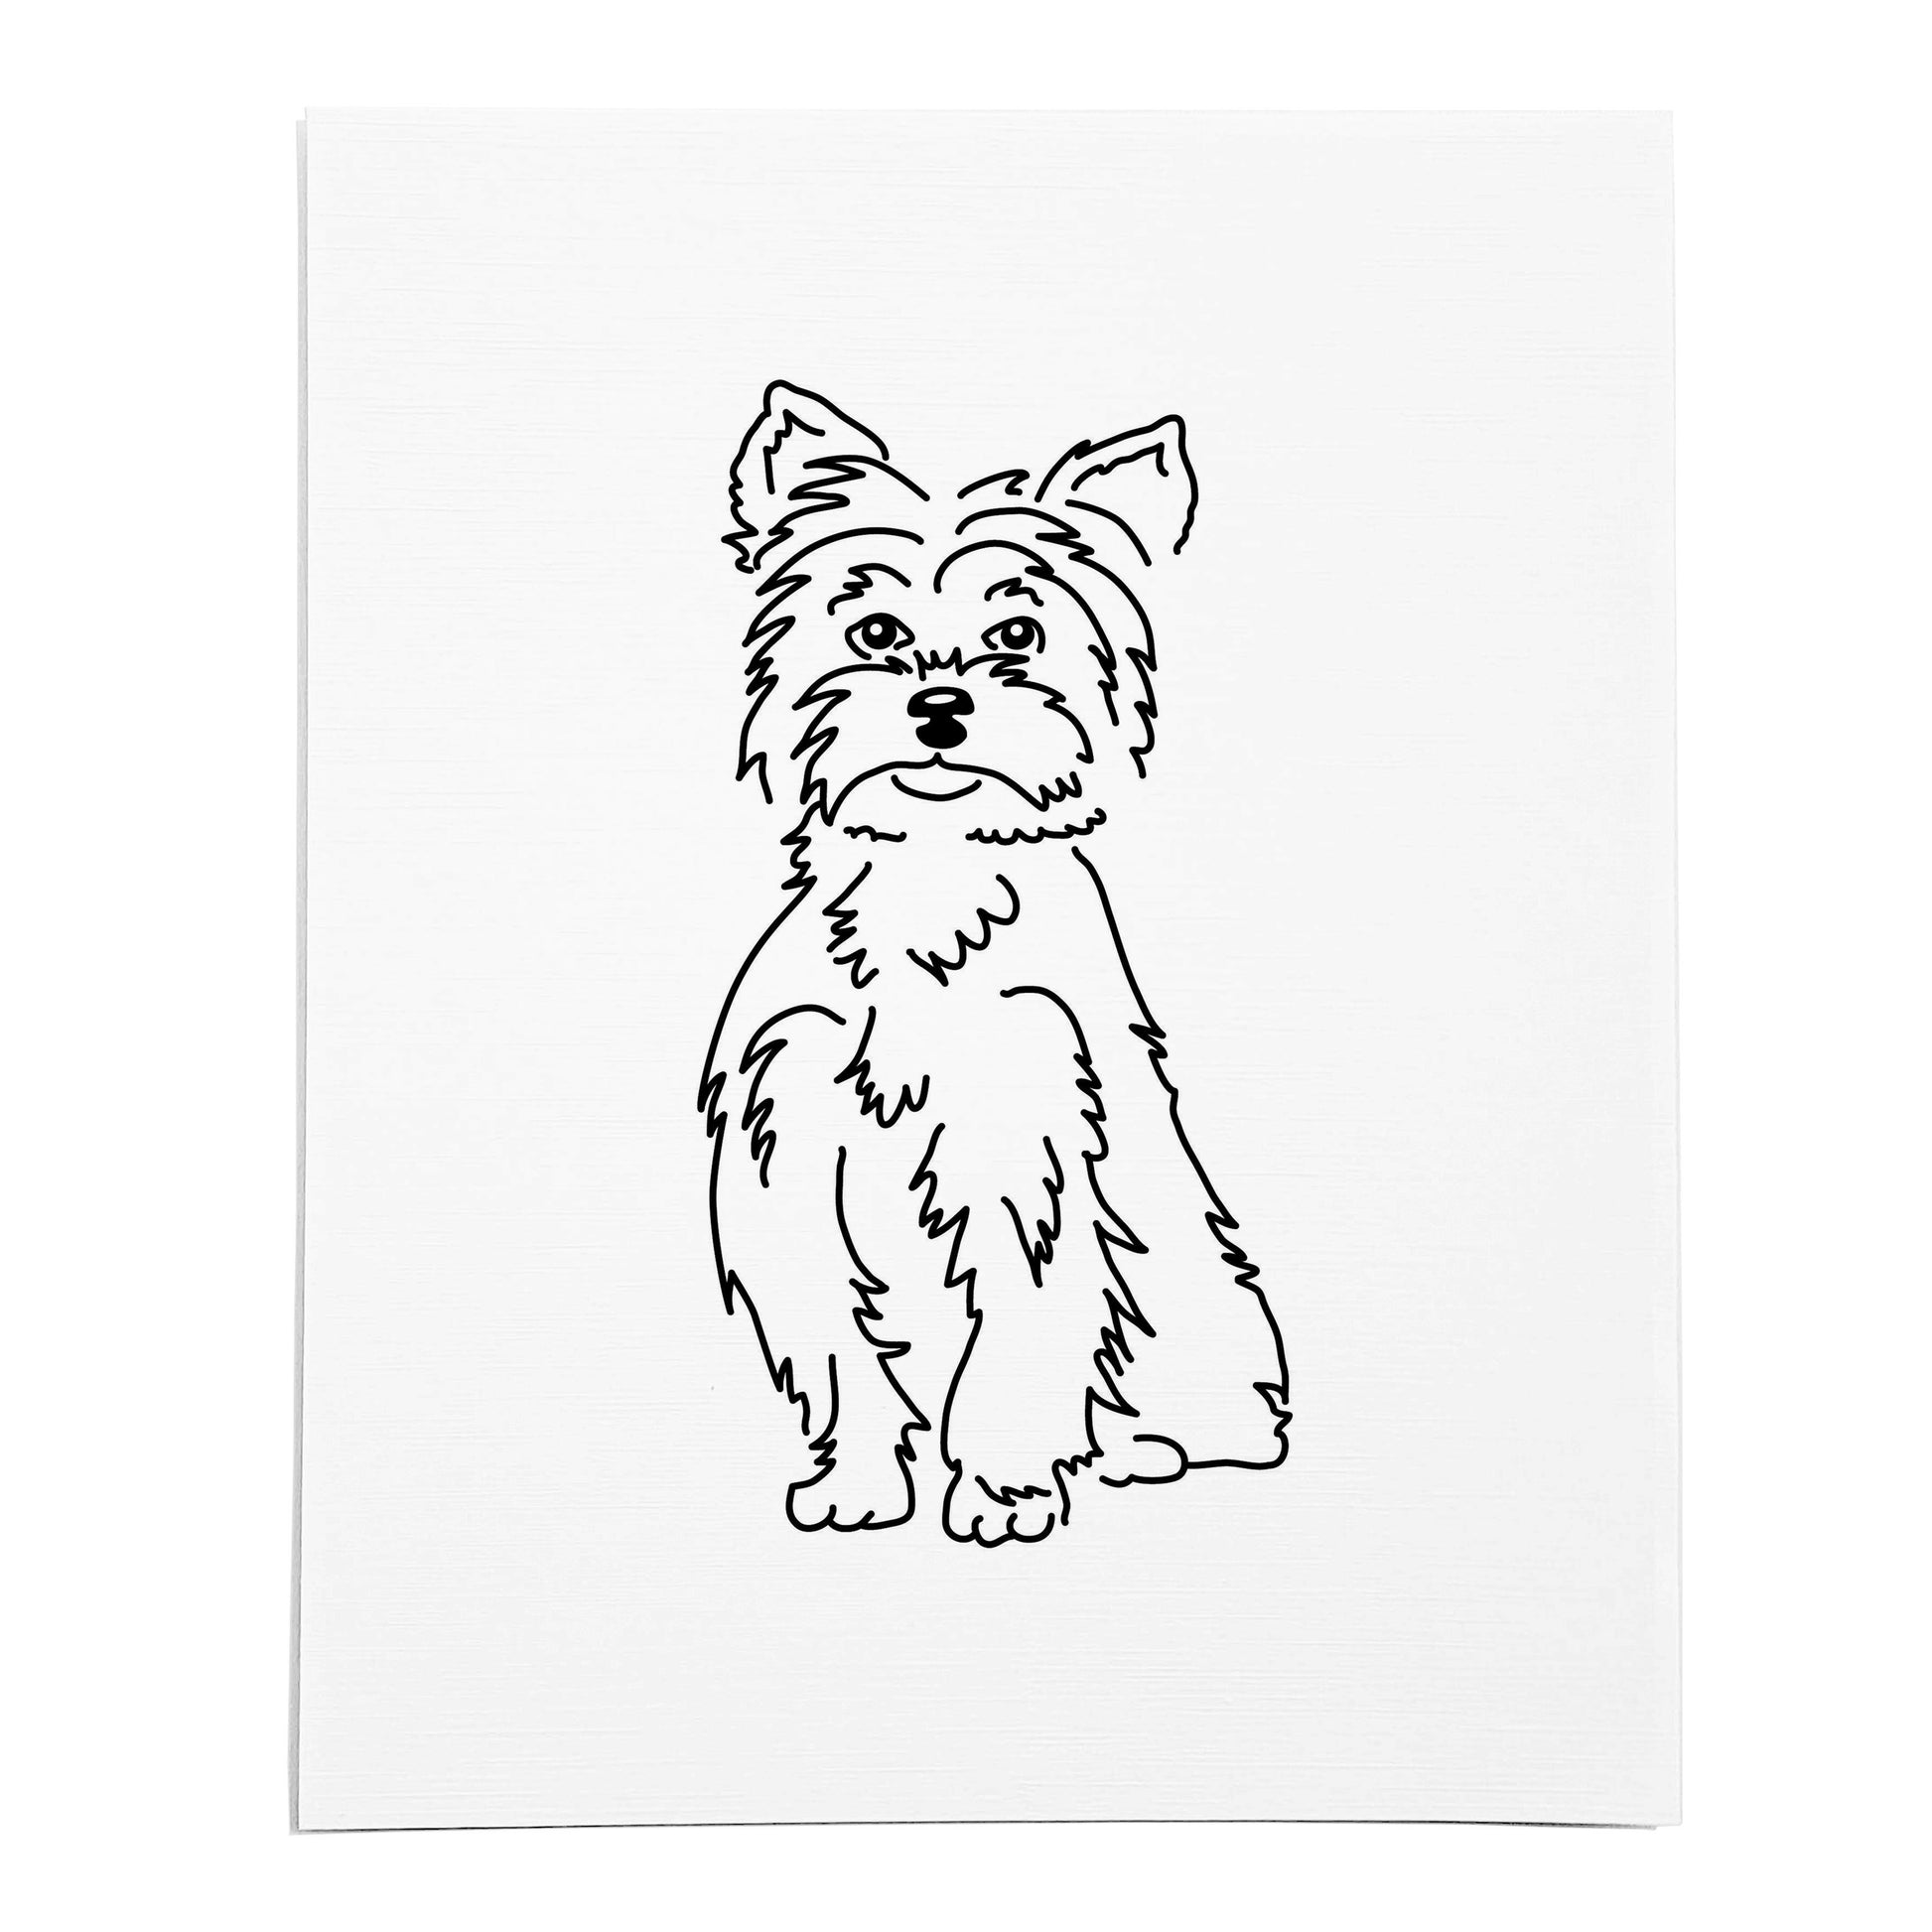 An art print featuring a line drawing of a Yorkshire Terrier dog on white linen paper